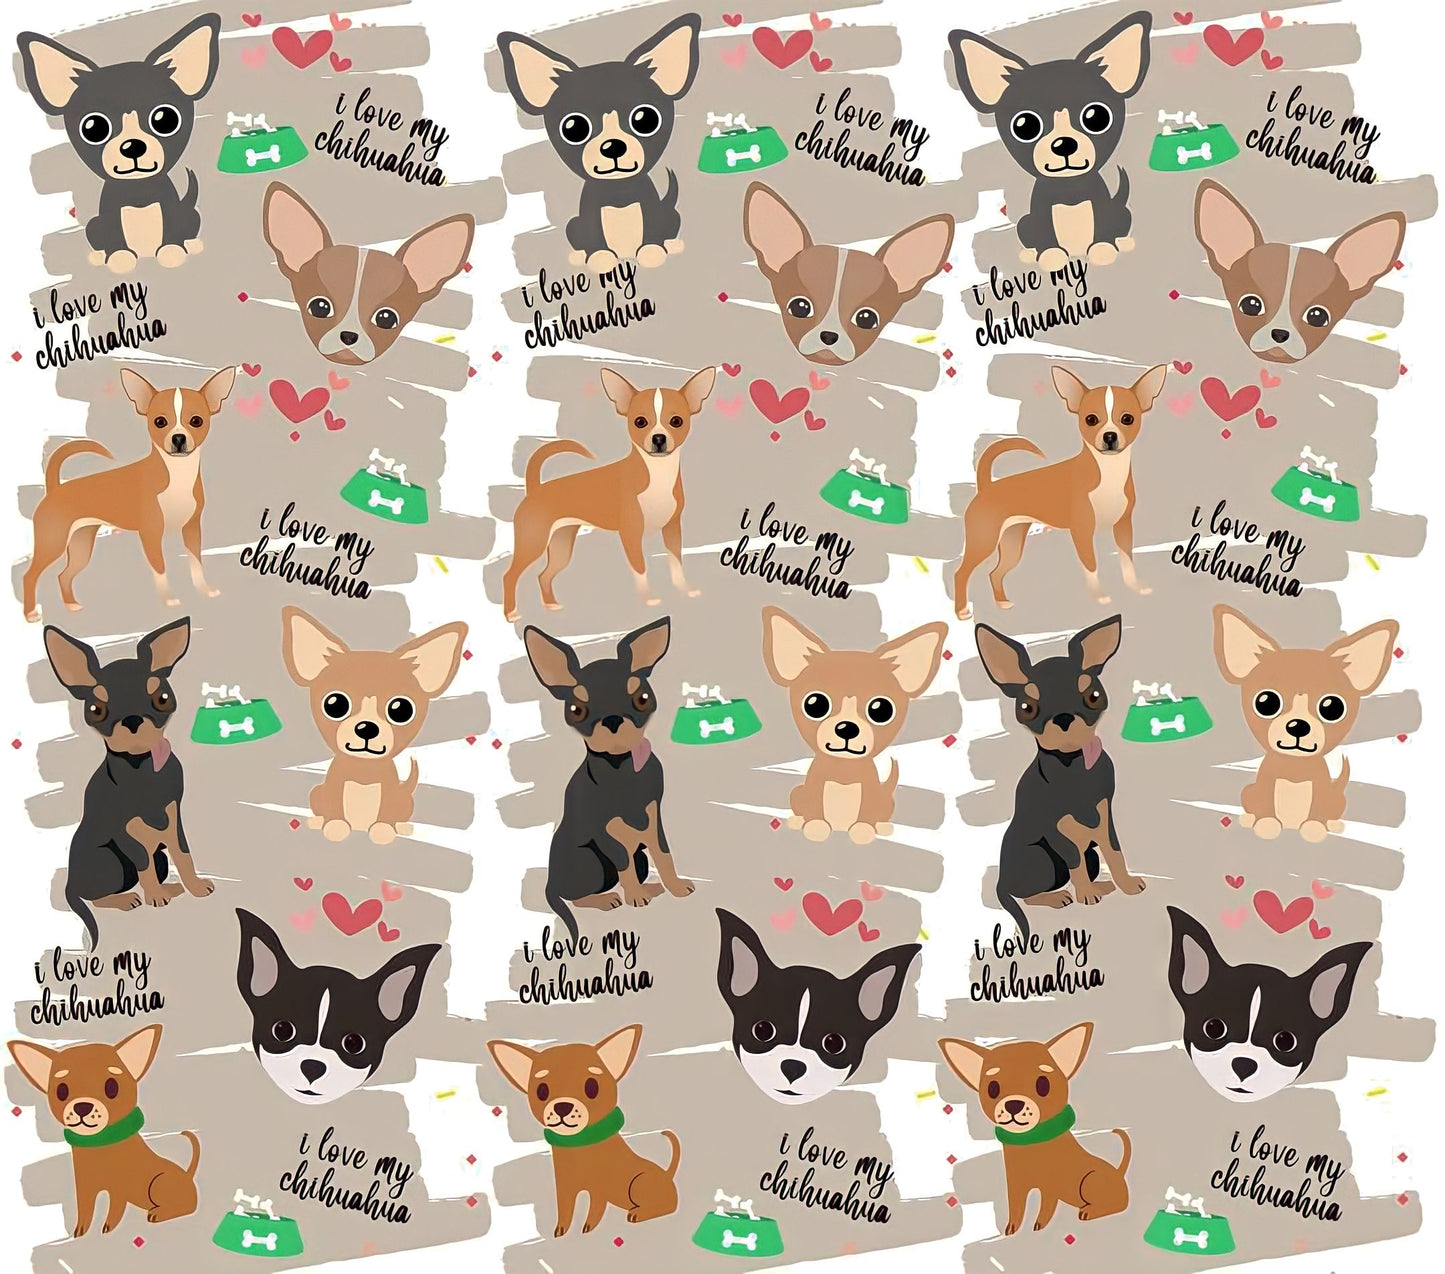 Chihuahua Appreciation - Cartoon - "I Love My Chihuahua" - Assorted Colored Dogs w/ Tan Background - 20 Oz Sublimation Transfer